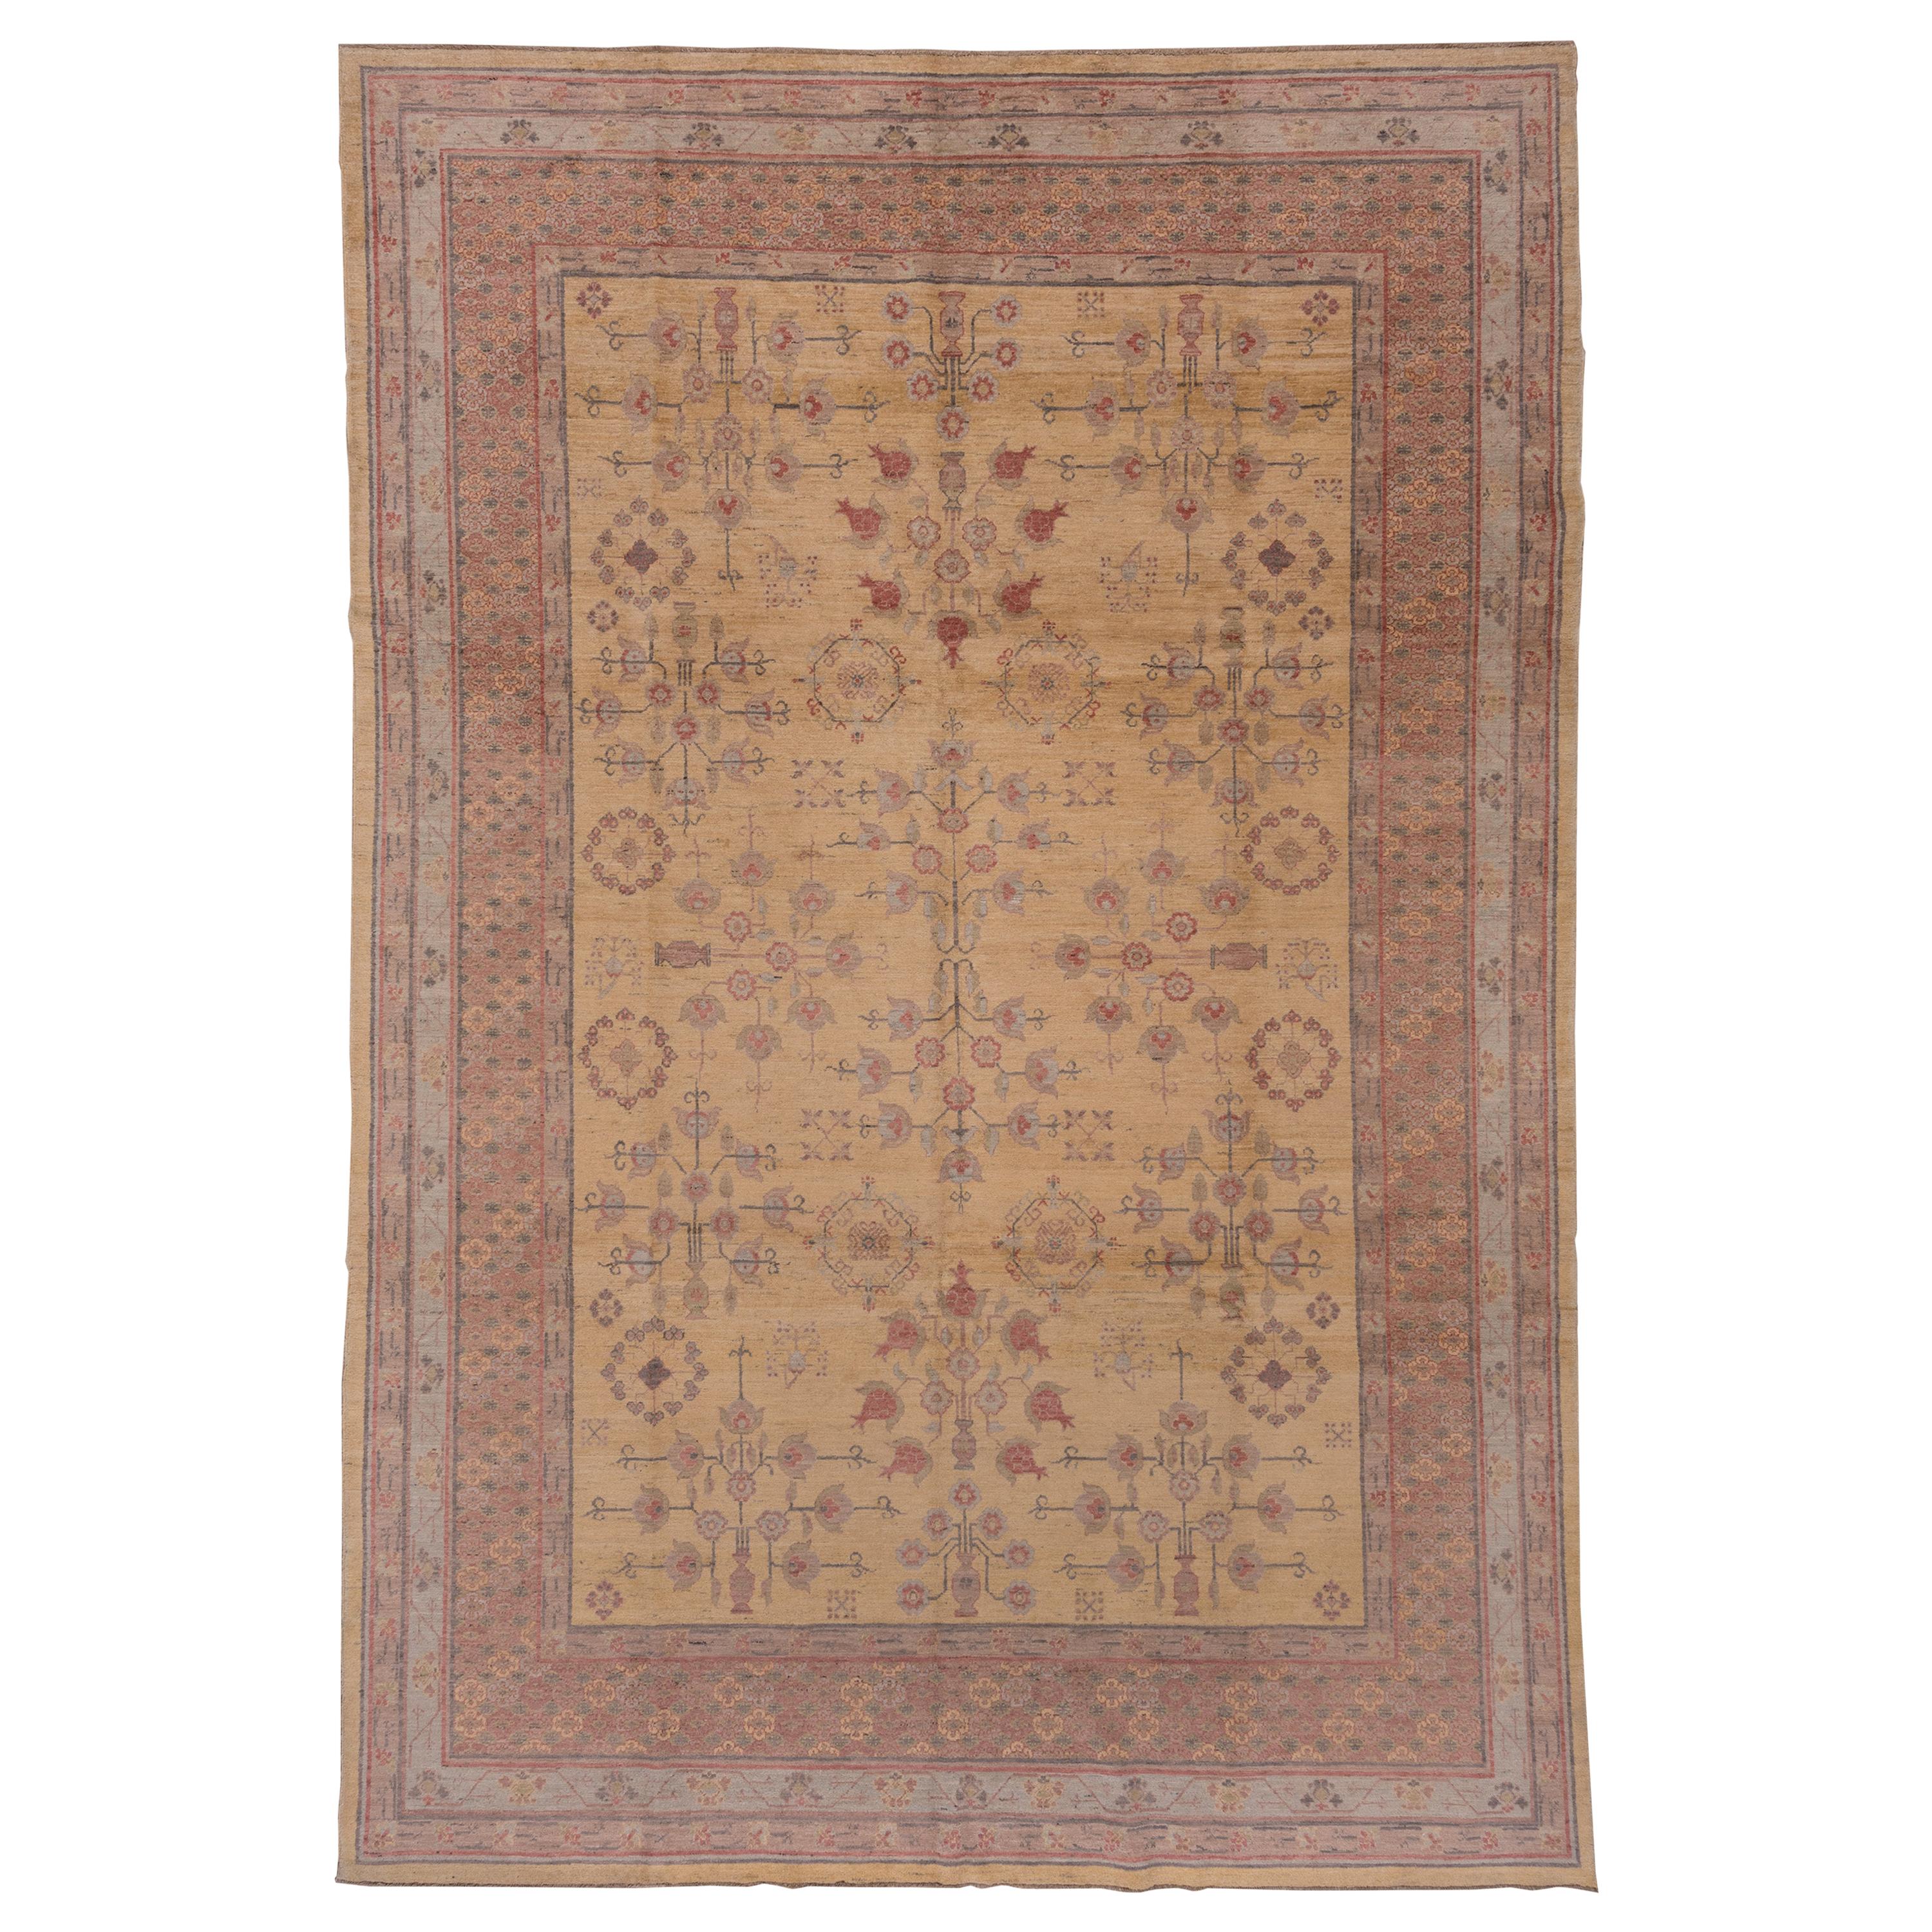 Khotan Design Rug, Yellow Field, Colorful Border, Pink Blue and Purple Accents